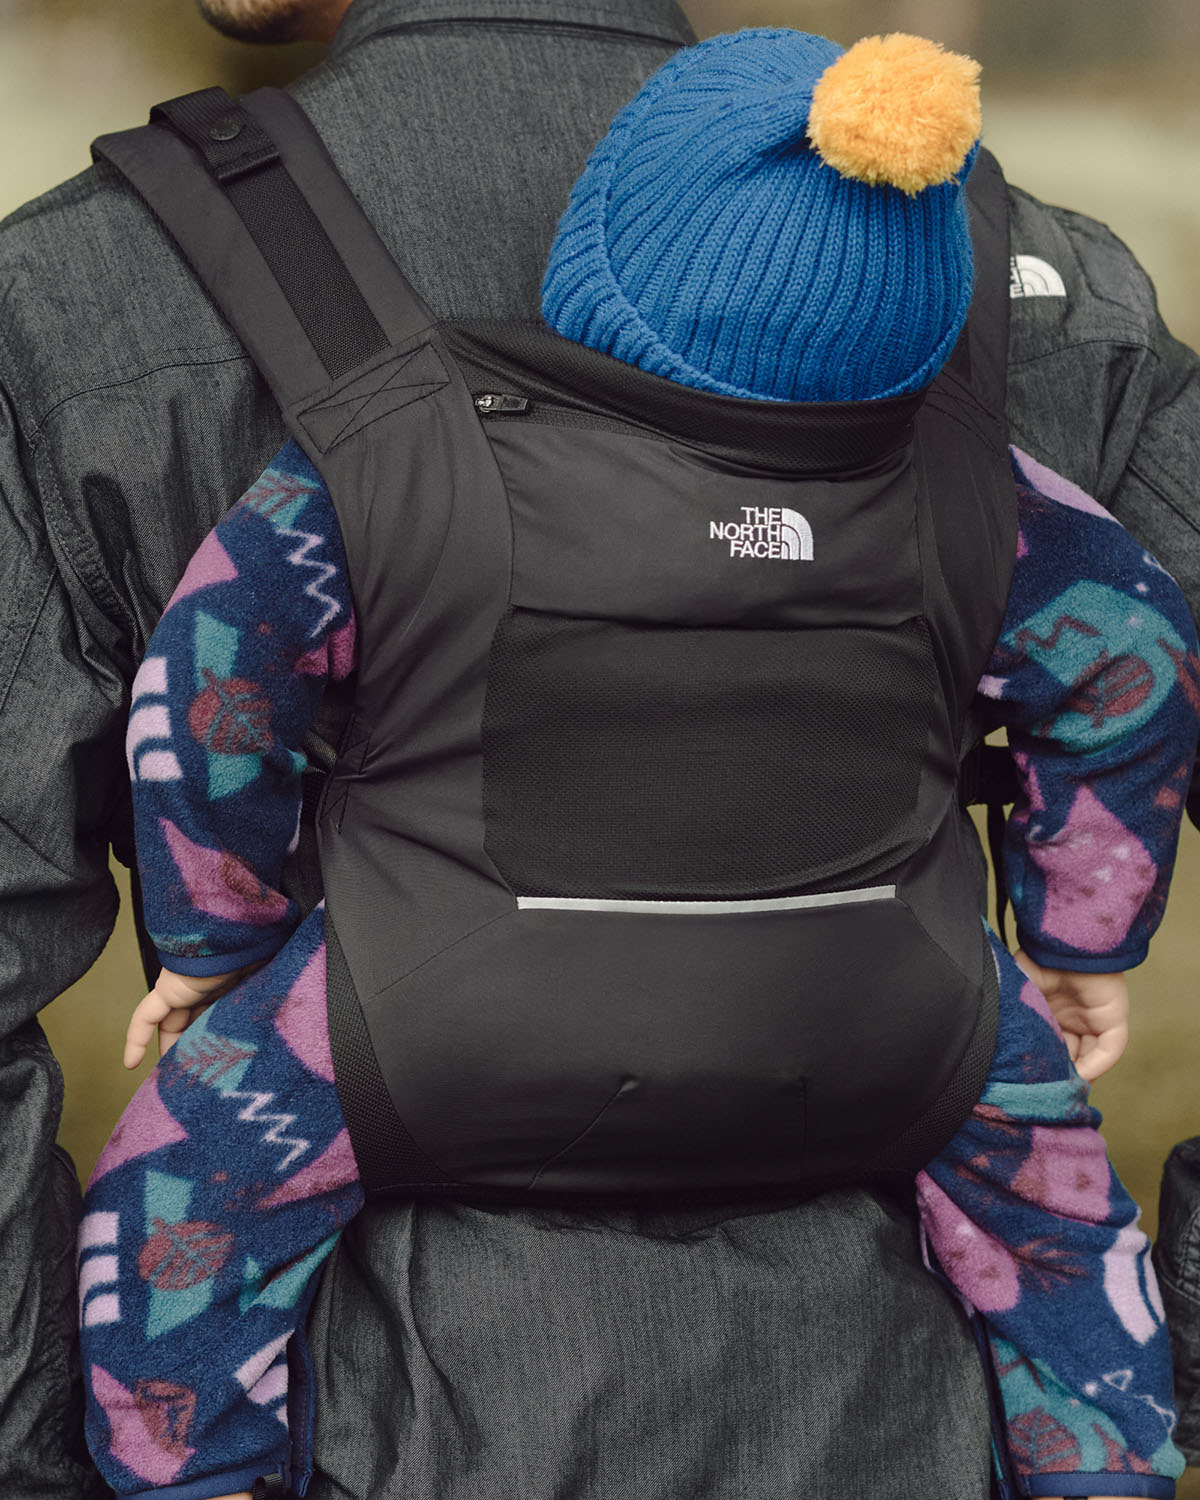 the-north-face-baby-carrier-01